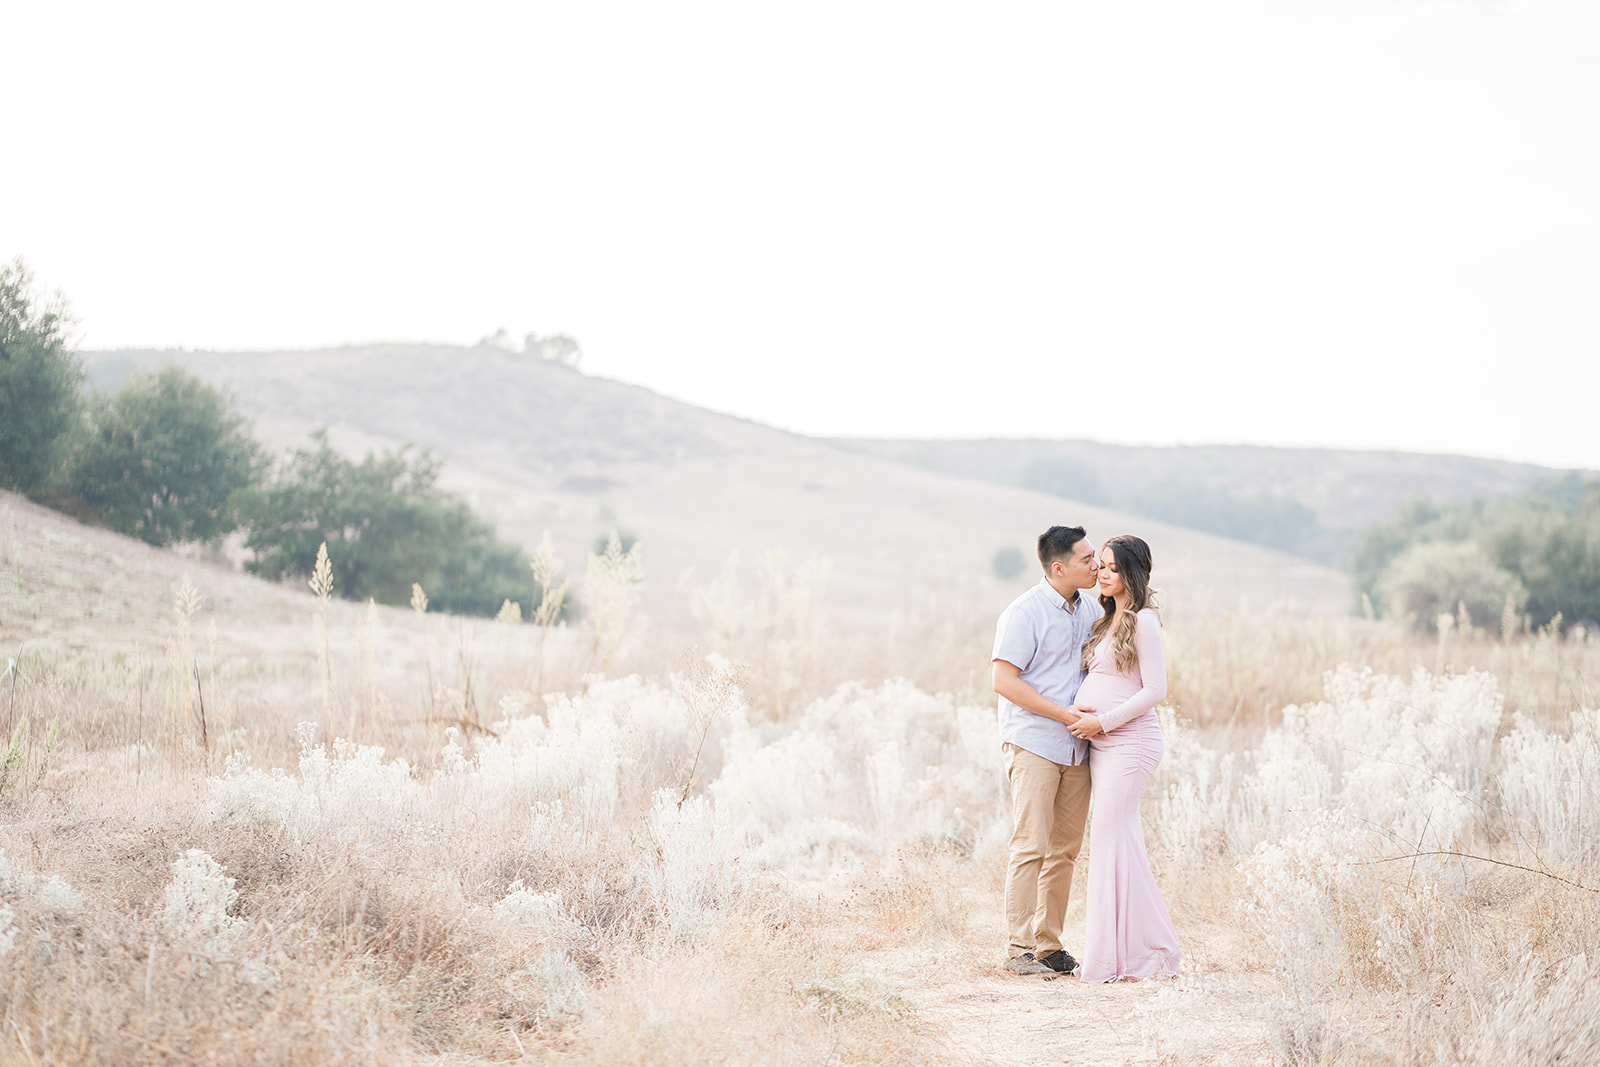 Expecting parents stand in a field of tall golden grass while sharing an intimate moment with hands on the bump